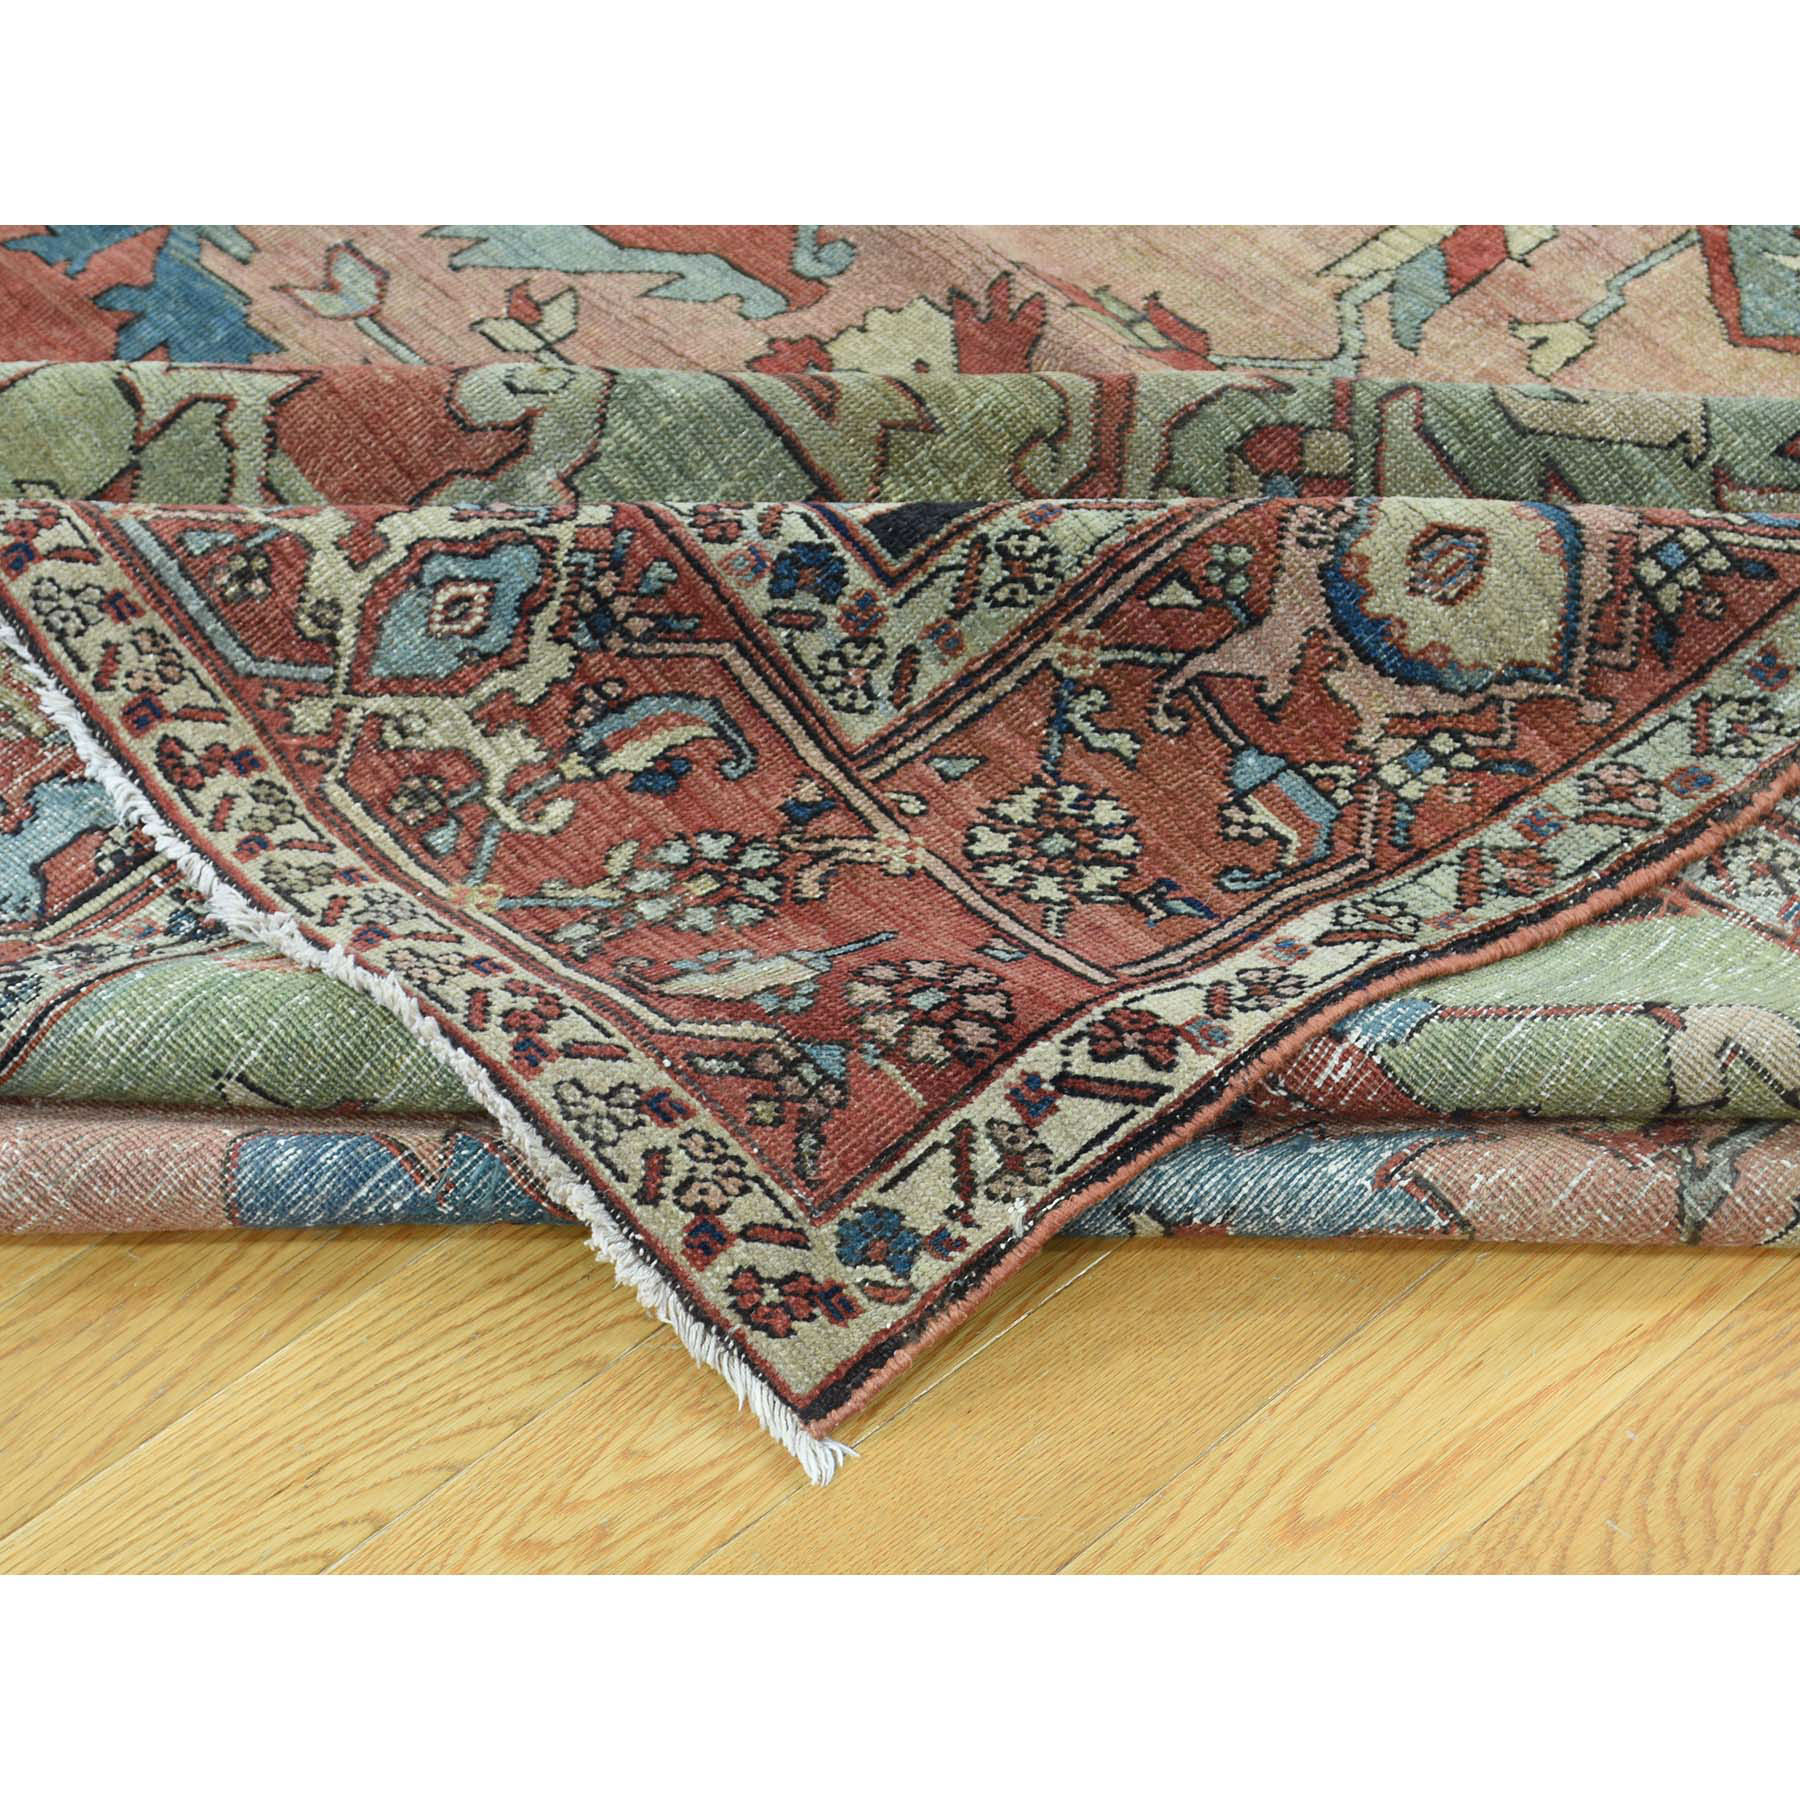 9-2 x13- Antique Persian Serapi Even Wear Hand-Knotted Oriental Rug 